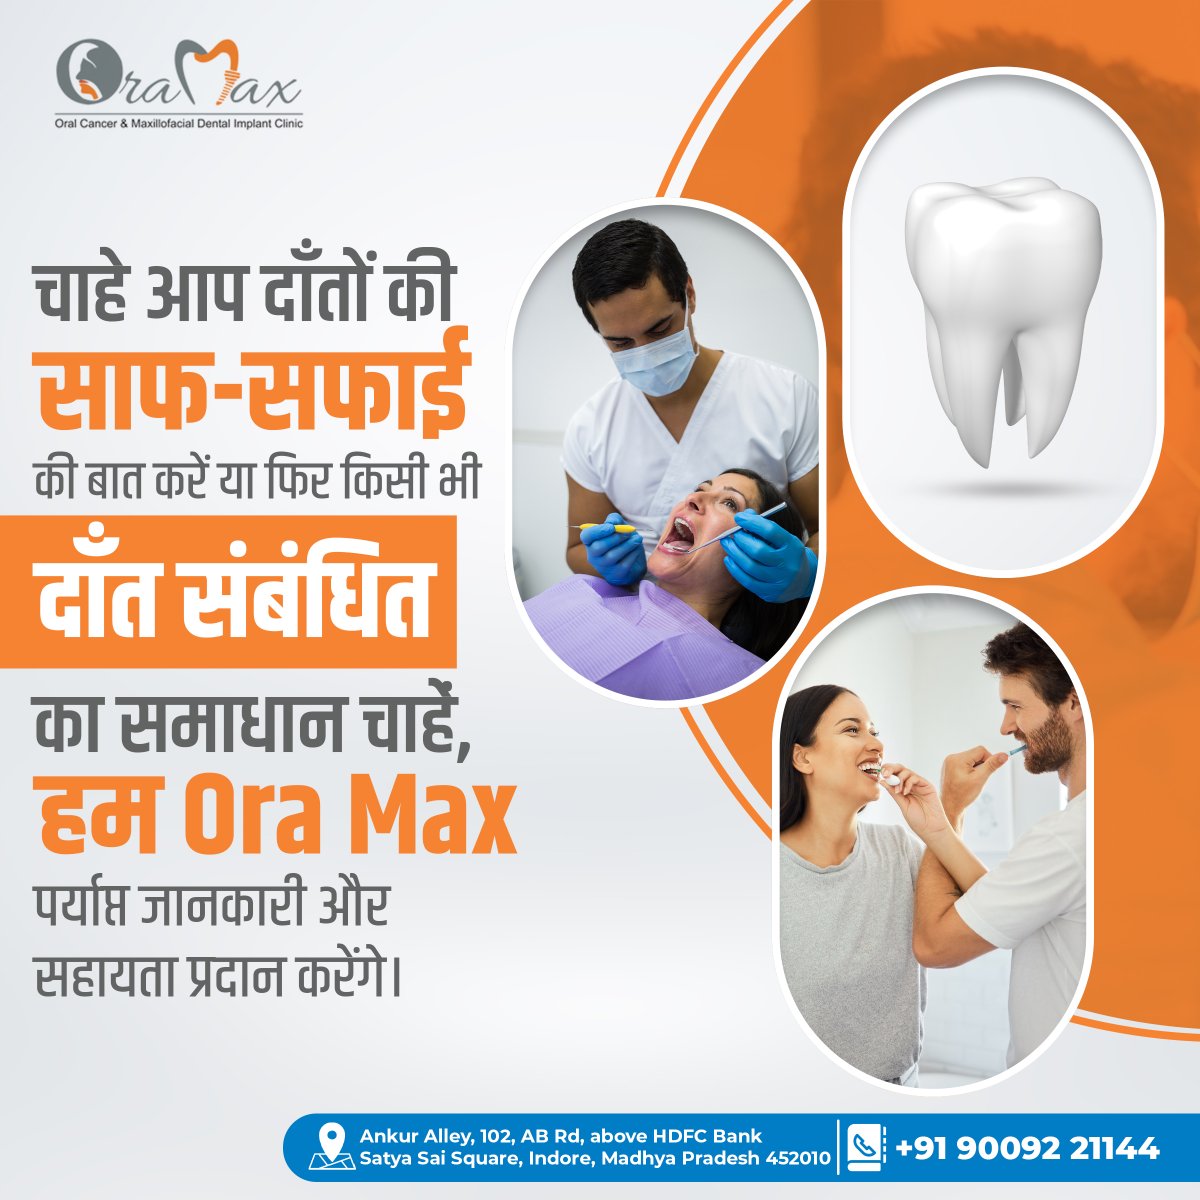 Visit Now:- Ankur Alley, 102, AB Rd, above HDFC Bank Satysai Square, Indore, Madhya Pradesh 452010
Contact US:- +91 90092 21144
.
#oramaxclinic
.
#ImplantSmiles #DentalComfort #DentalCare #oralhygiene #toothpainrelief #dentalimplants #crownimplant #oralcare #indore